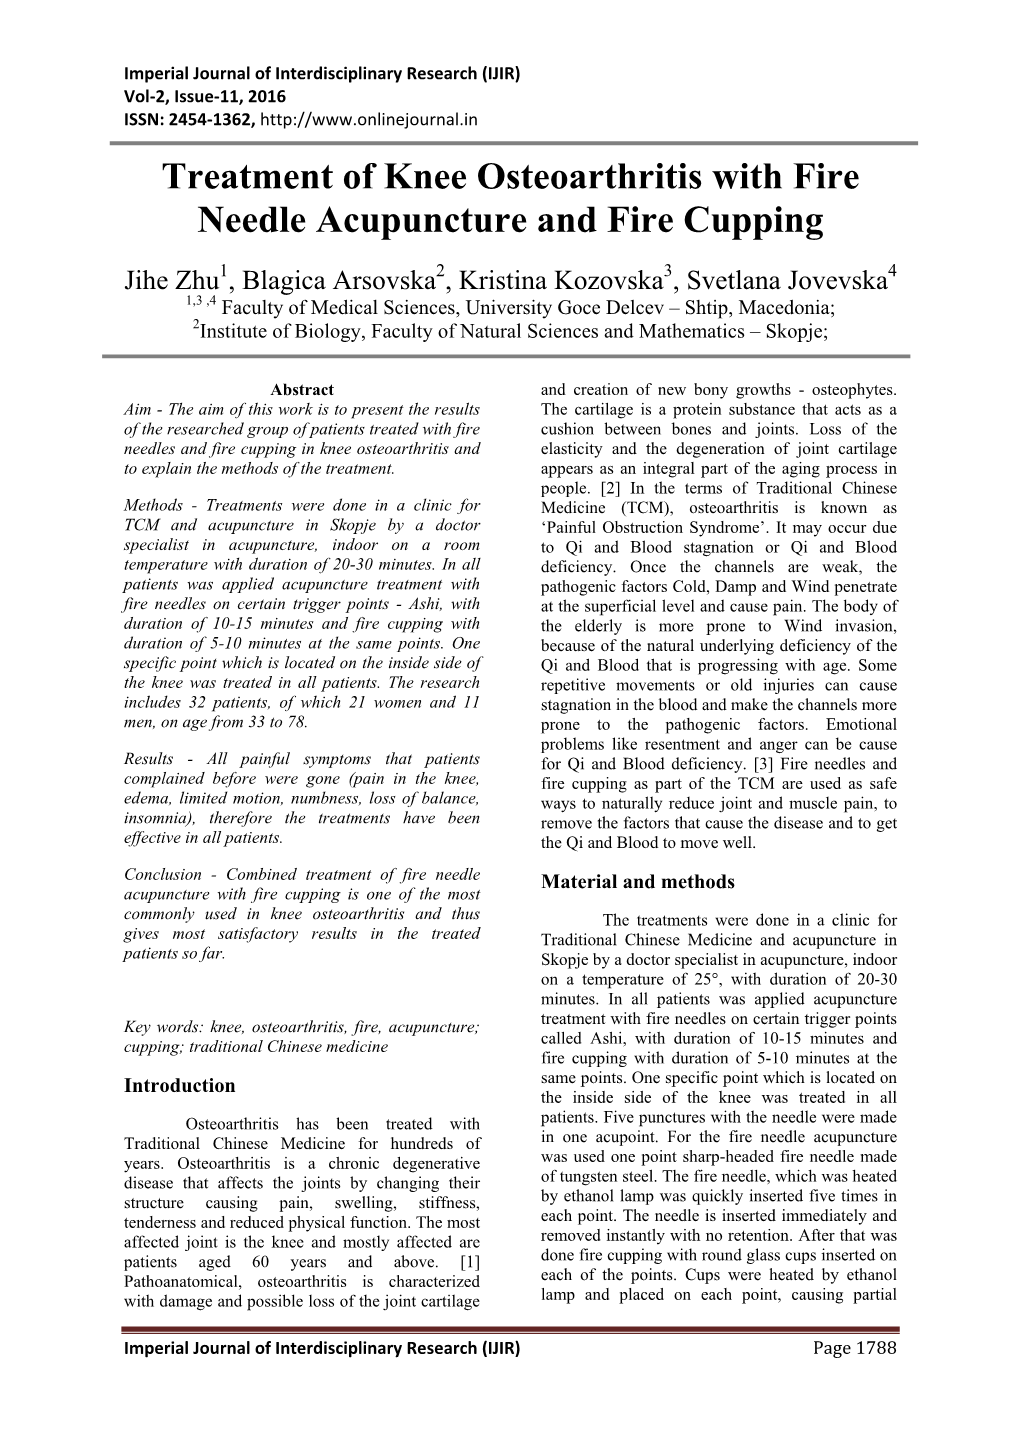 Treatment of Knee Osteoarthritis with Fire Needle Acupuncture and Fire Cupping